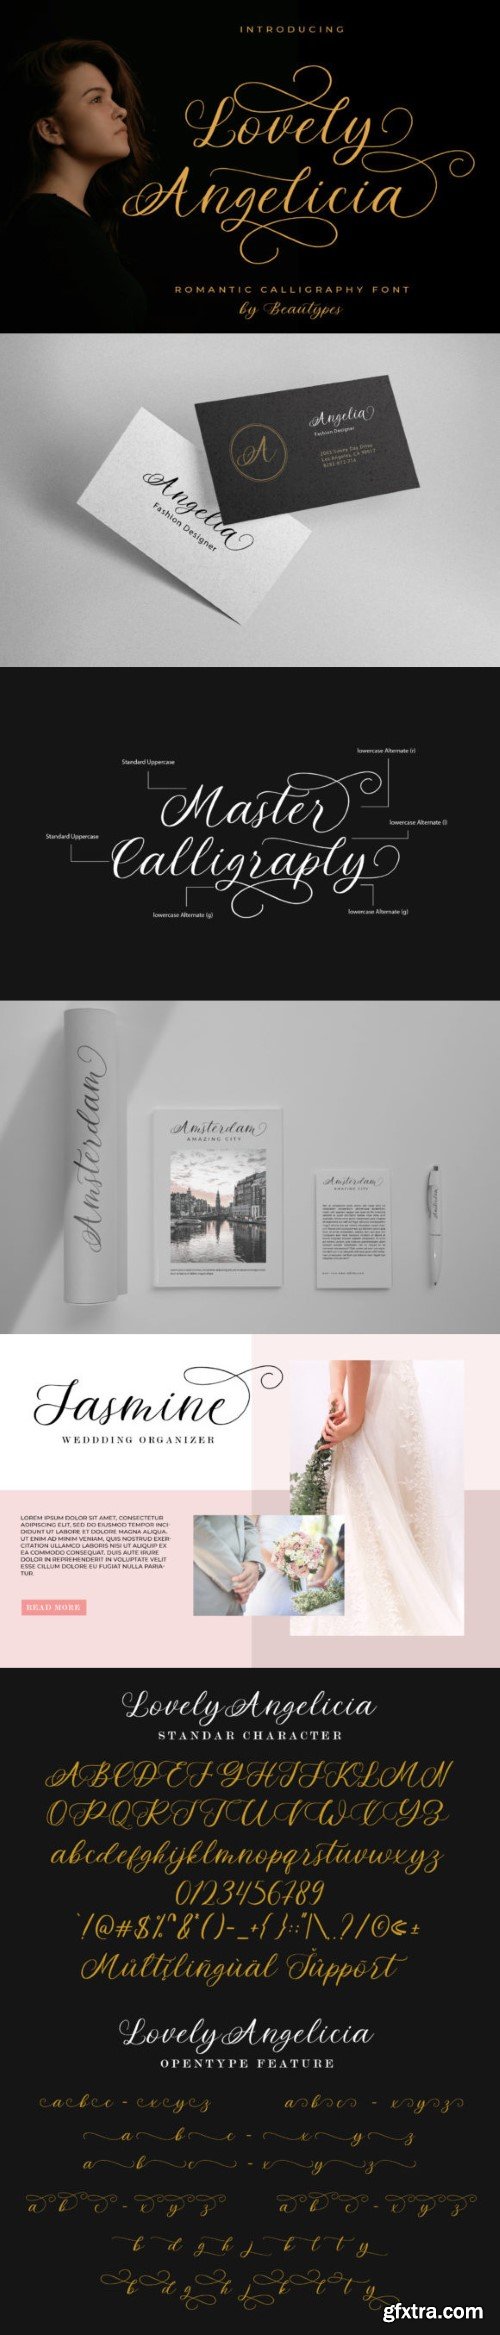 Lovely Angelicia Font